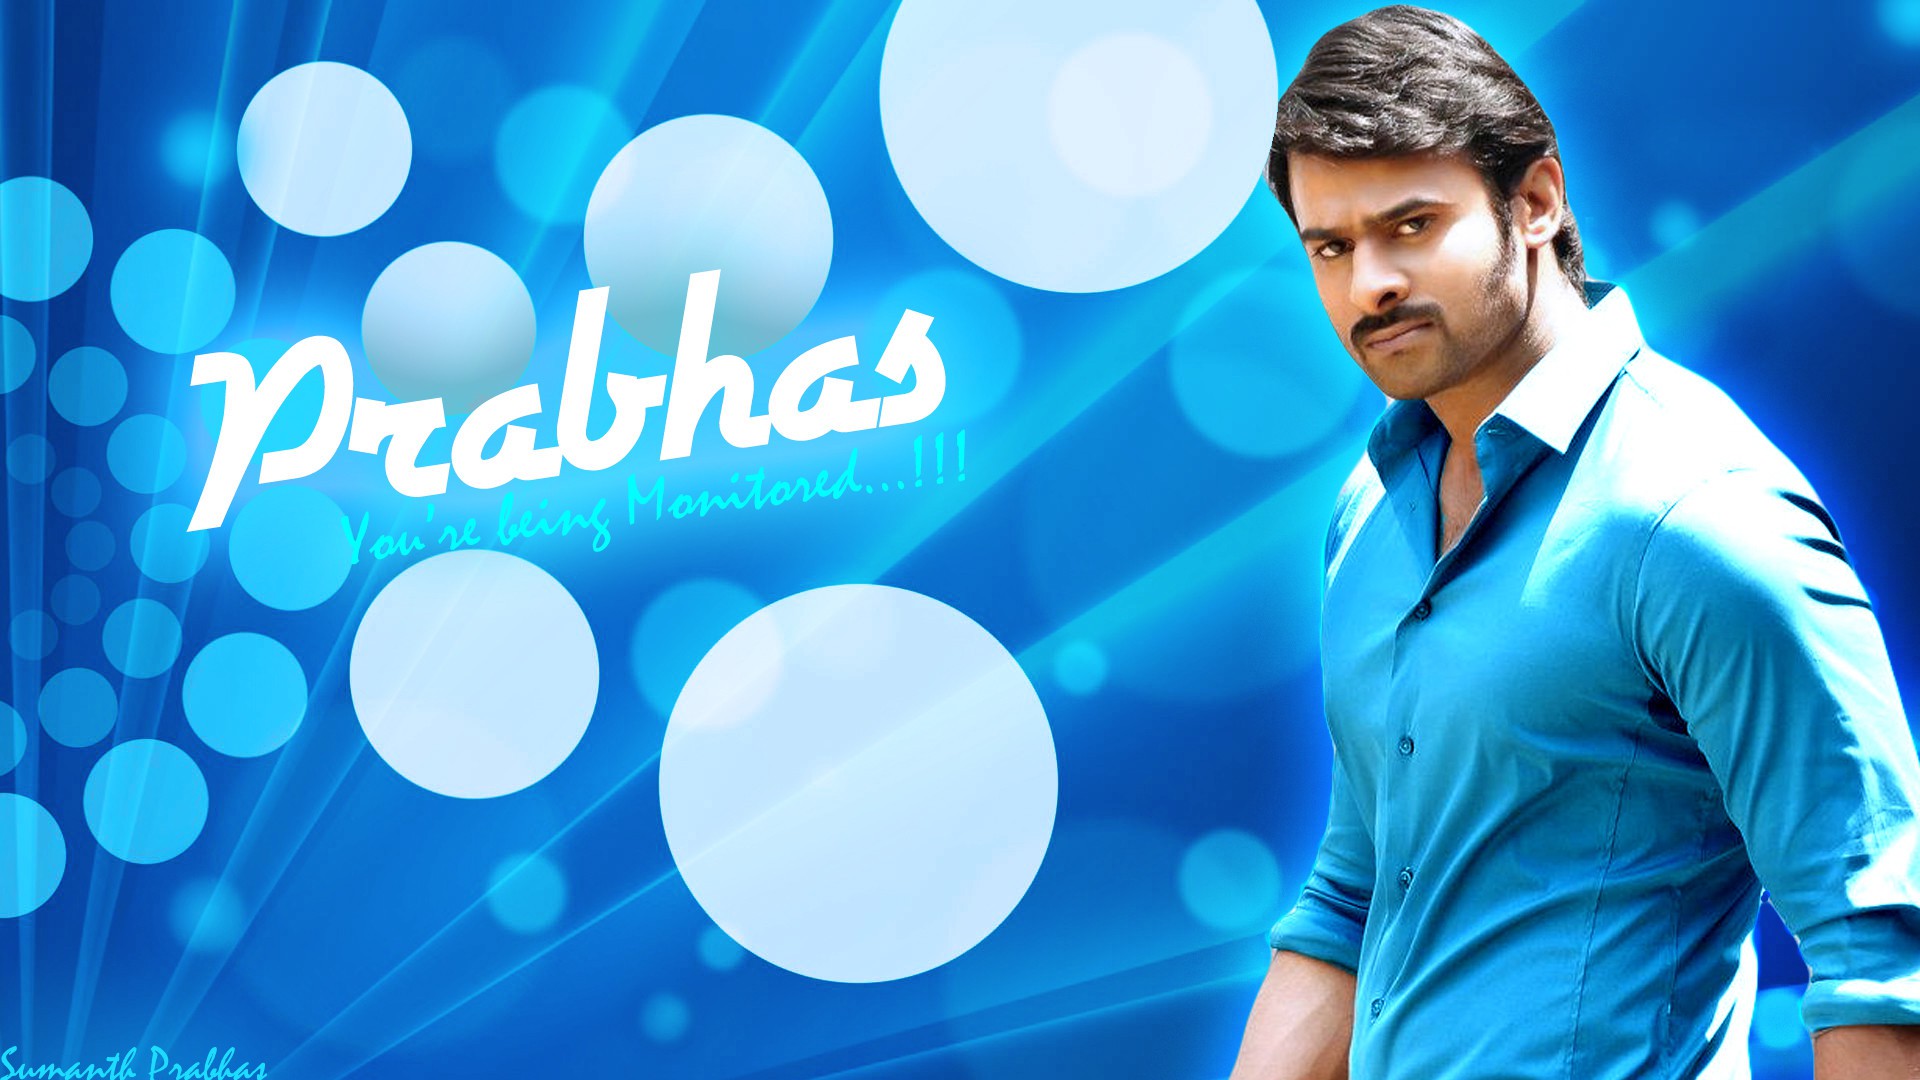 prabhas blue download hd picture